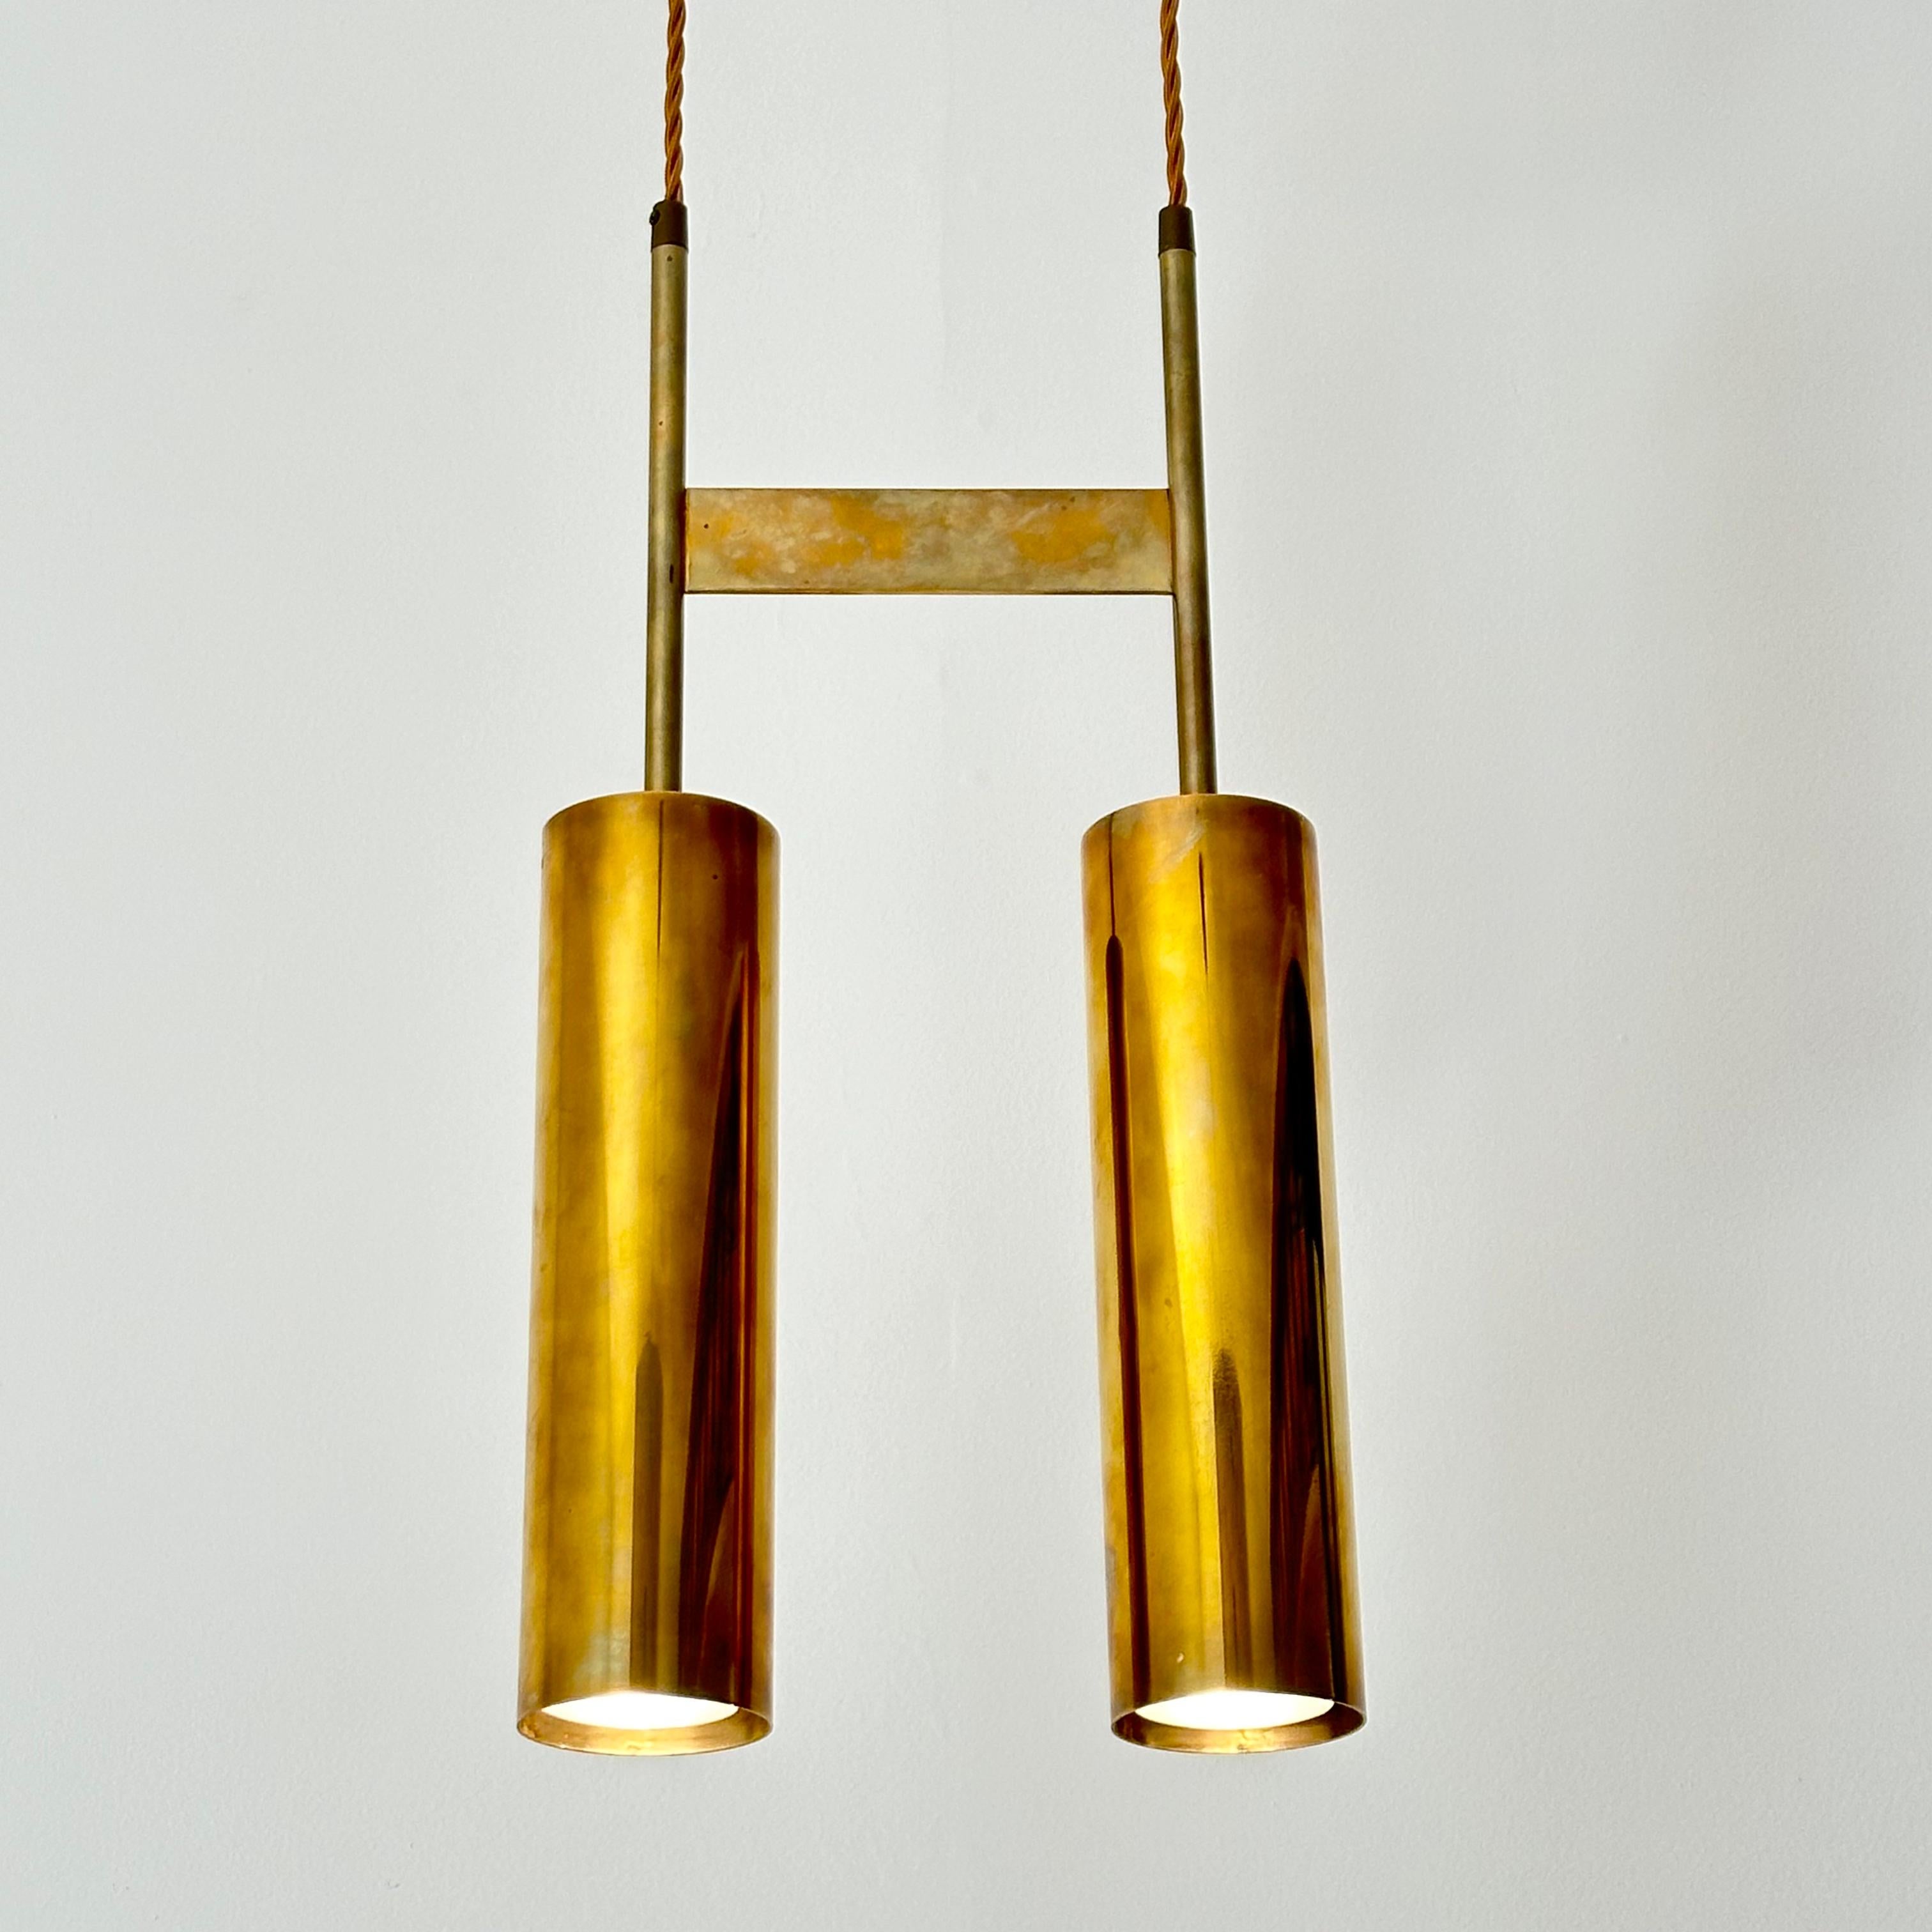 Modernist double pendant light executed in solid brass, attributed to Jo Hammerborg for Fog & Mørup. Brass is unlacquered, exhibiting natural oxidation (if desired, inquire with us regarding finishing options). Superb quality. Recently rewired,